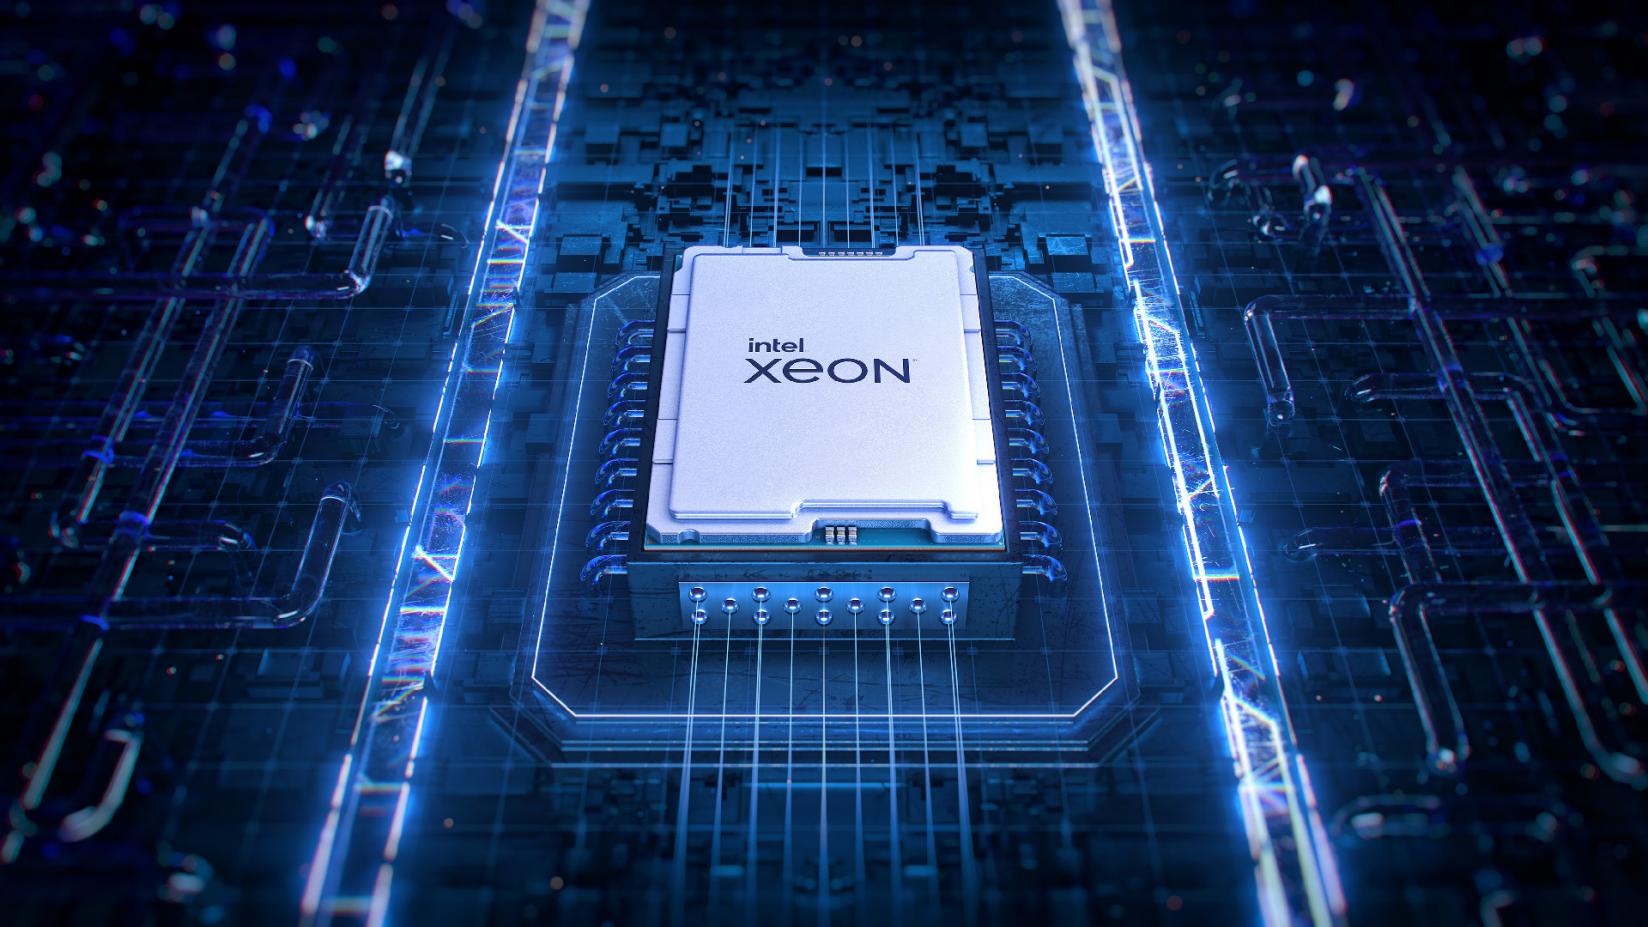 Intel Launches New Xeon Workstation Processors